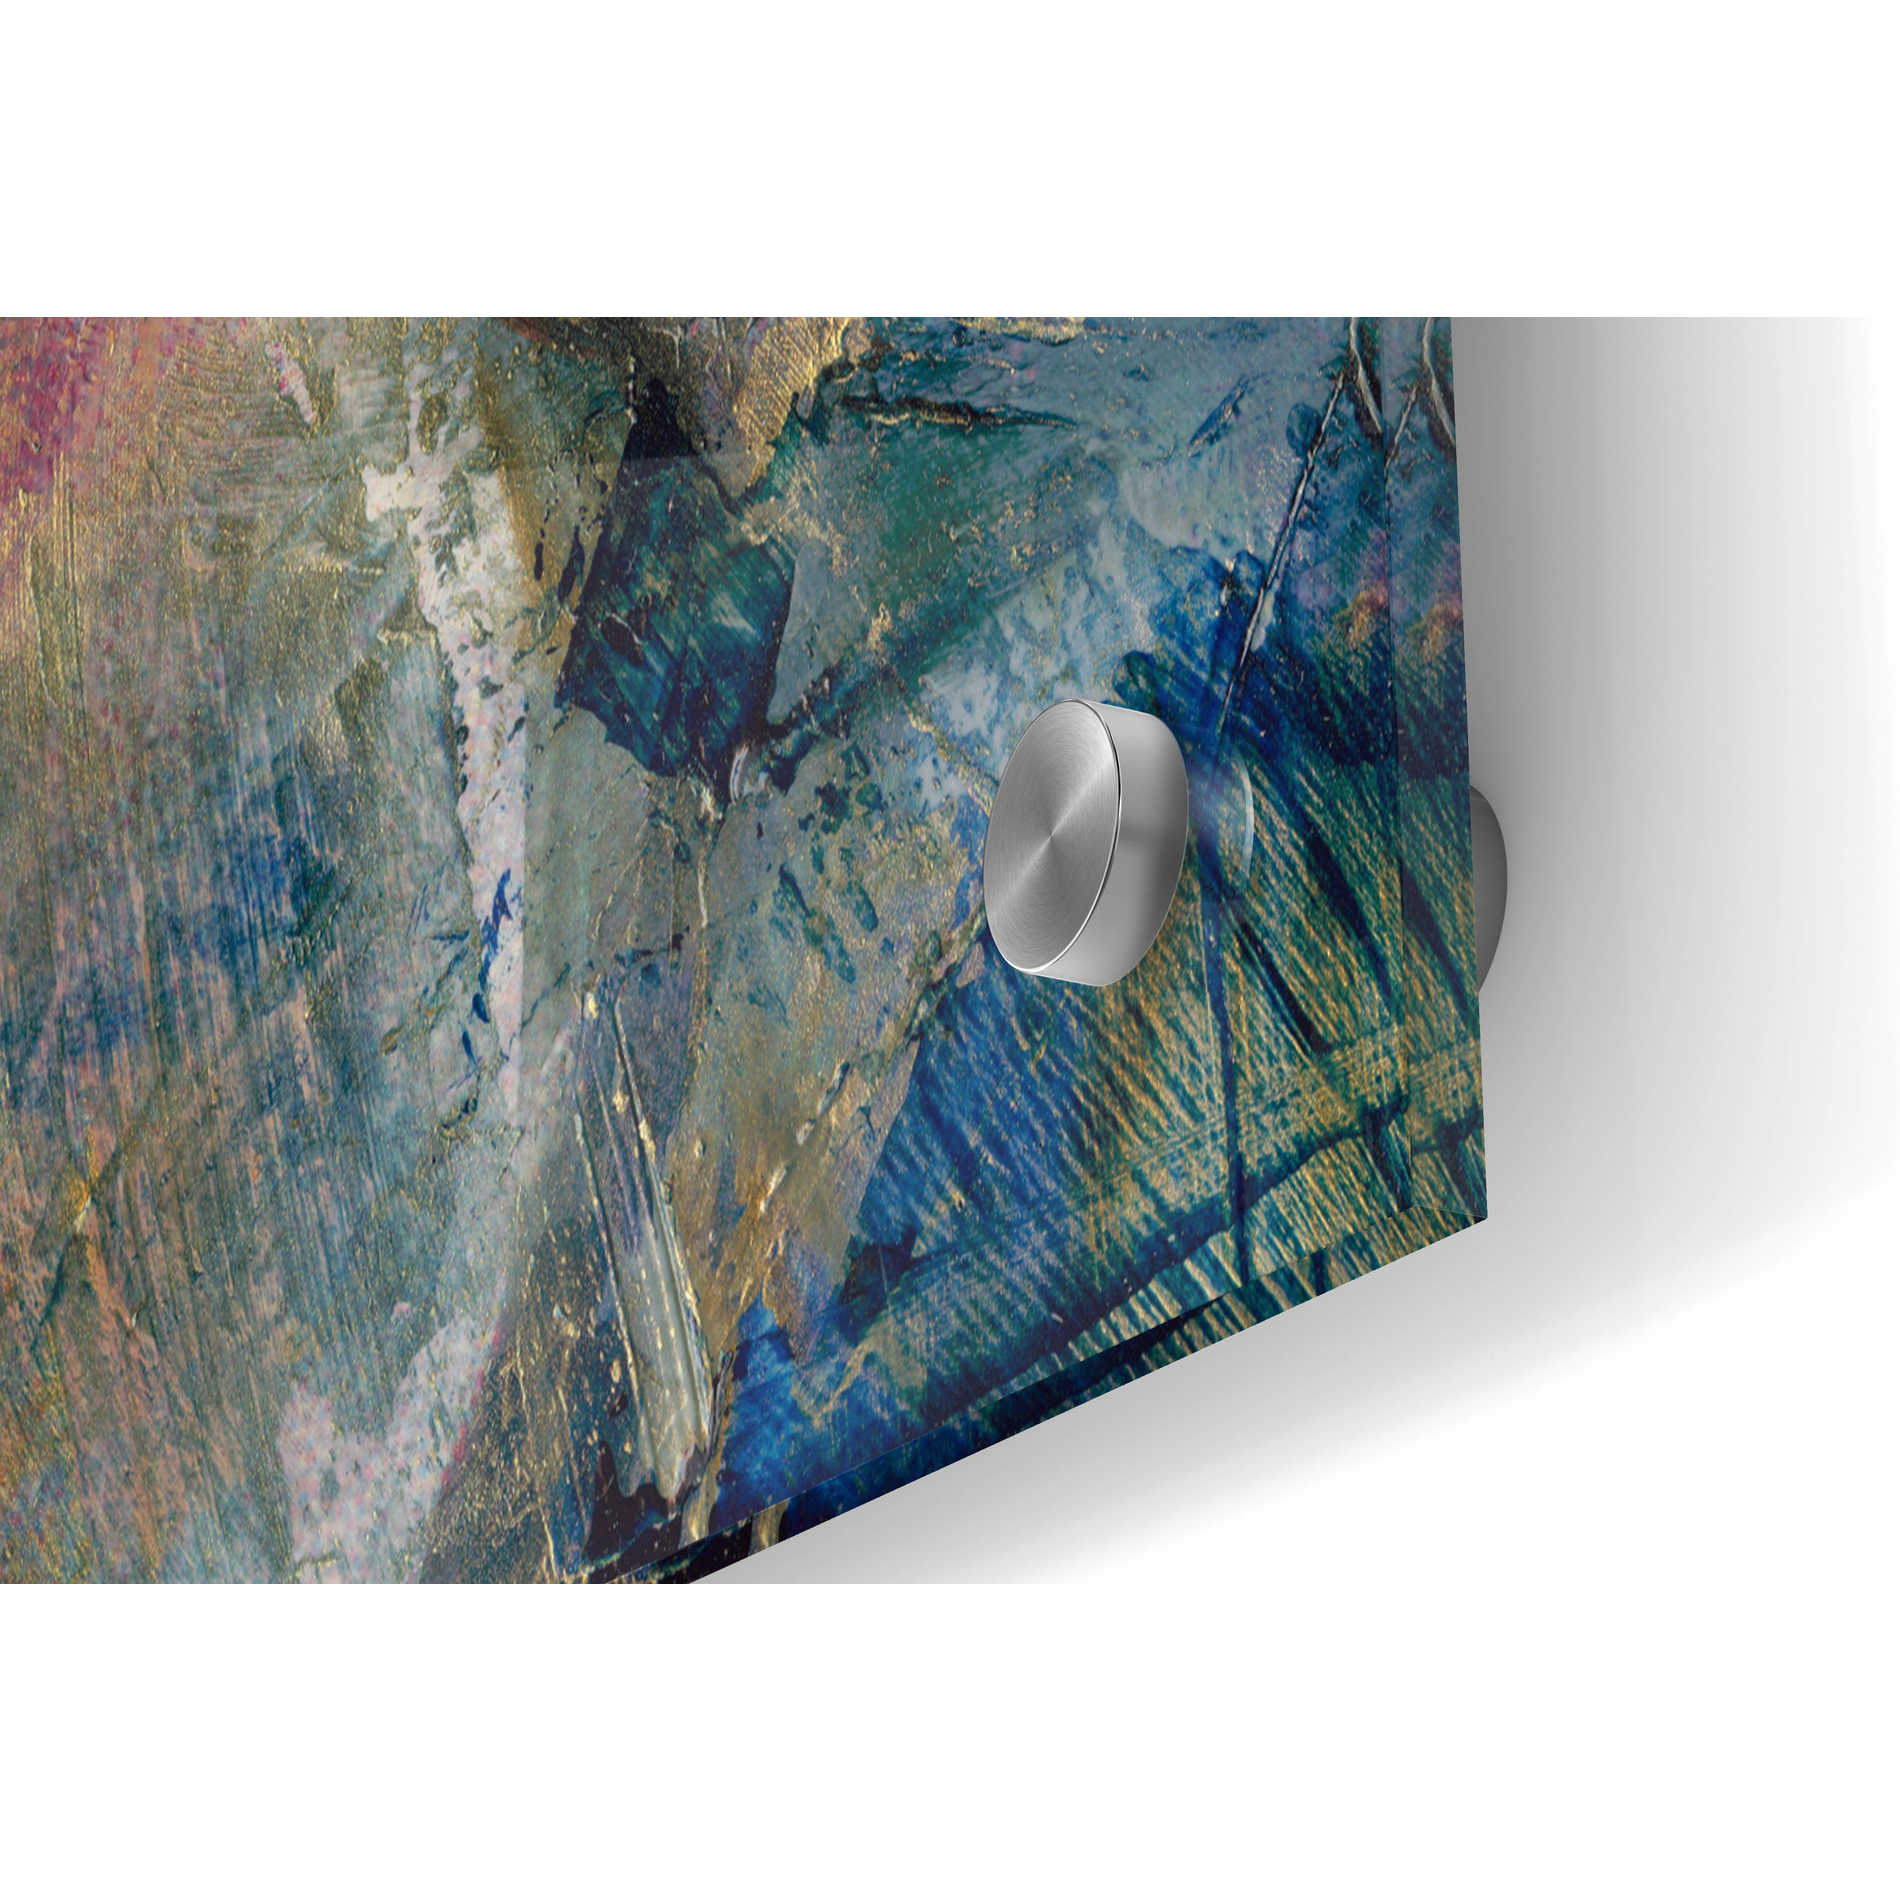 Epic Art 'Floral in Bloom IV' by Tim O'Toole, Acrylic Glass Wall Art,36x24